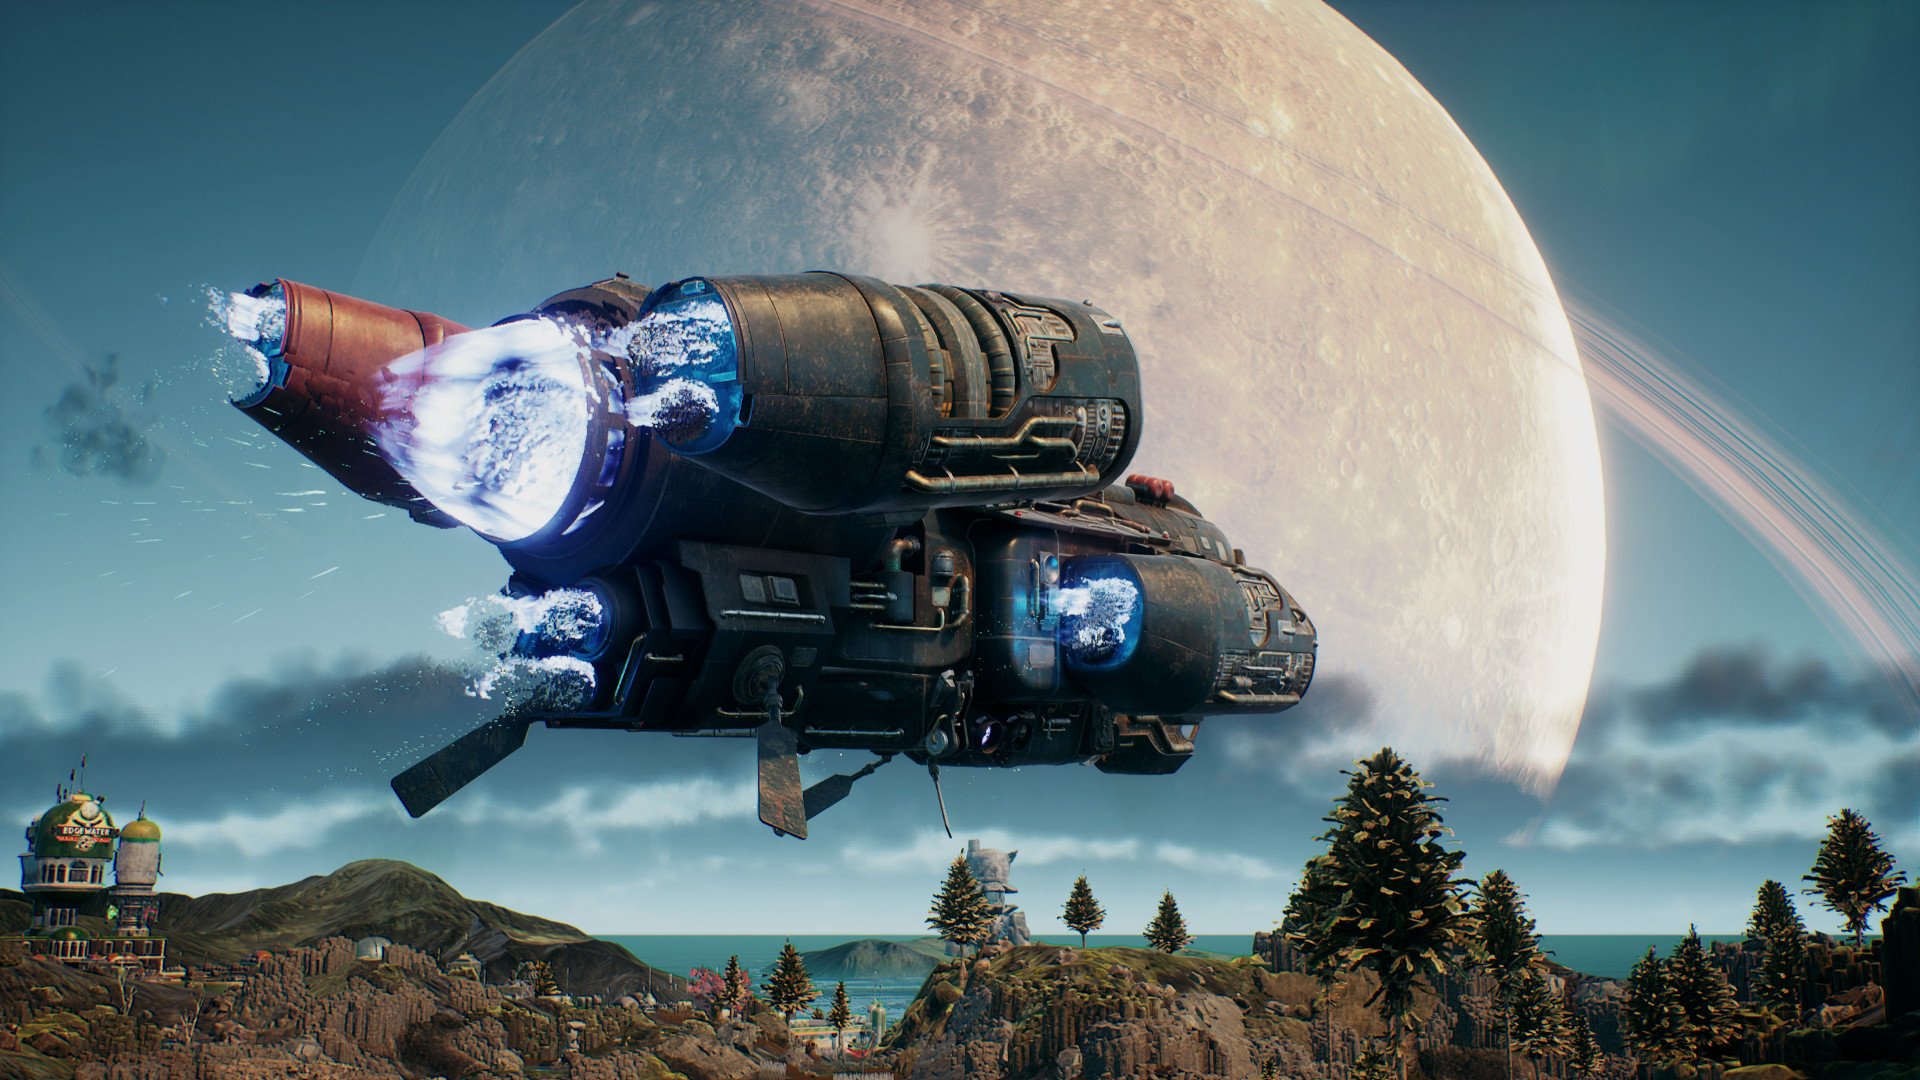 The Outer Worlds Xbox One review: This maiden voyage is an instant classic